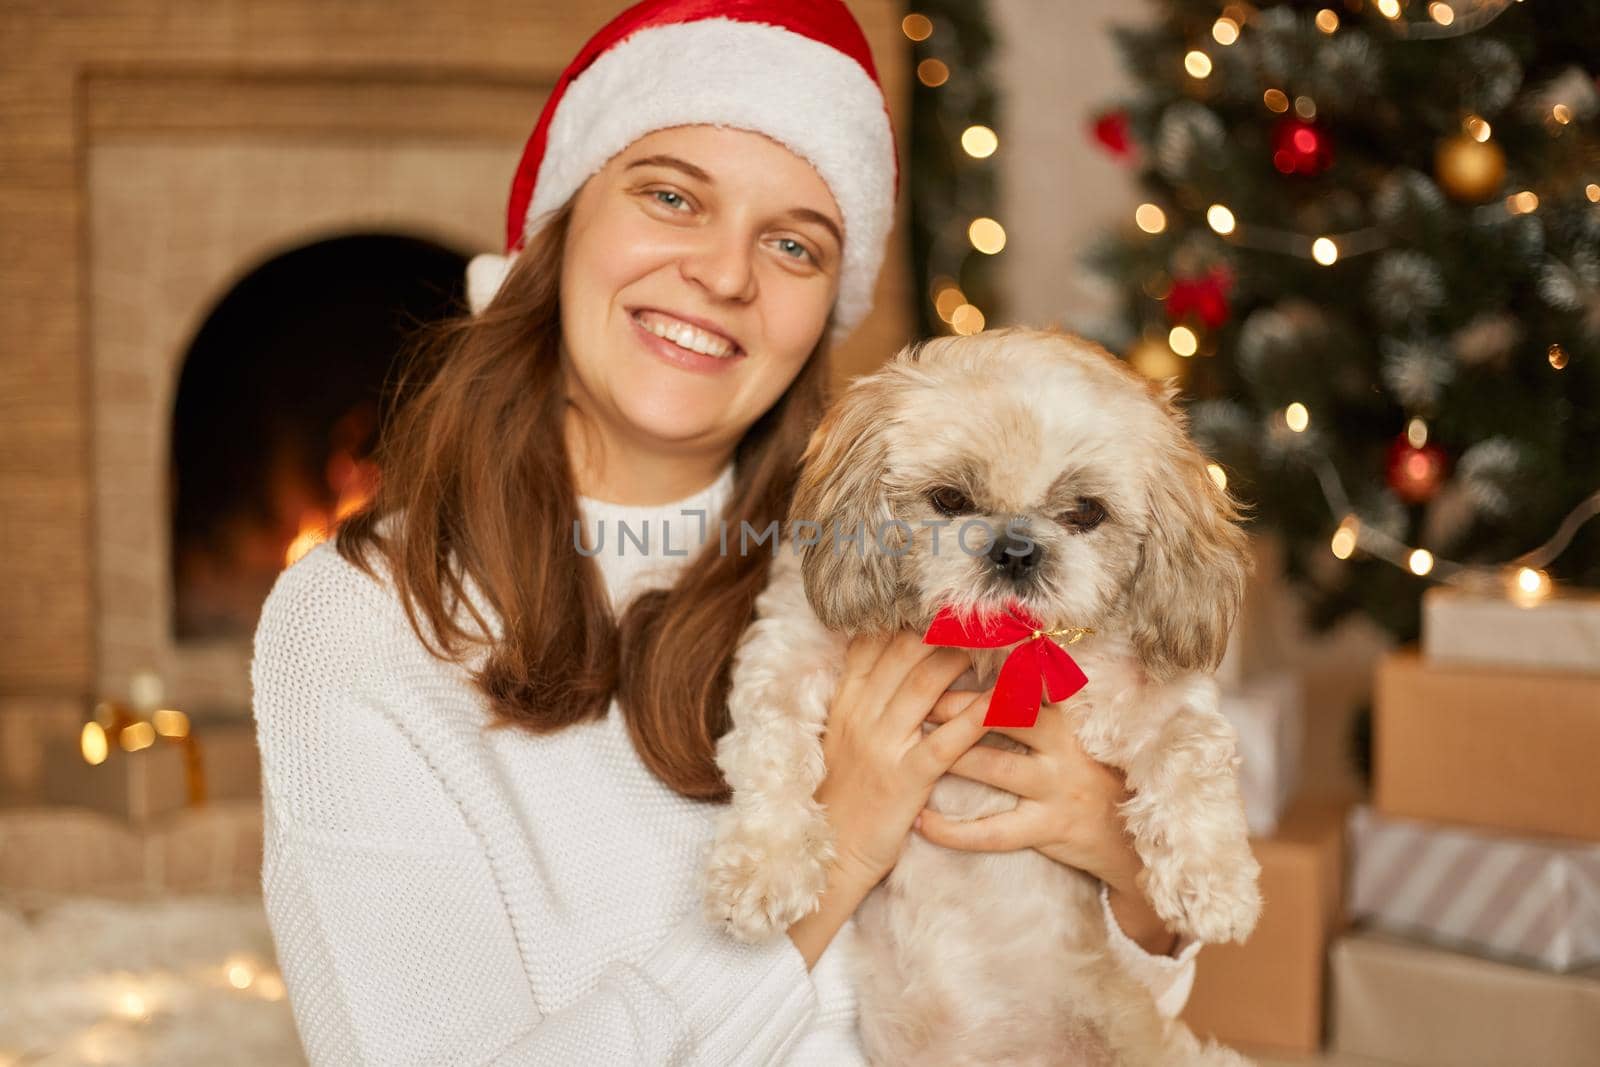 Cheerful young lady is enjoying time with her pet while posing in living room with x-mas tree and fireplace, woman wearing santa claus hat and white jumper, christmas atmosphere.